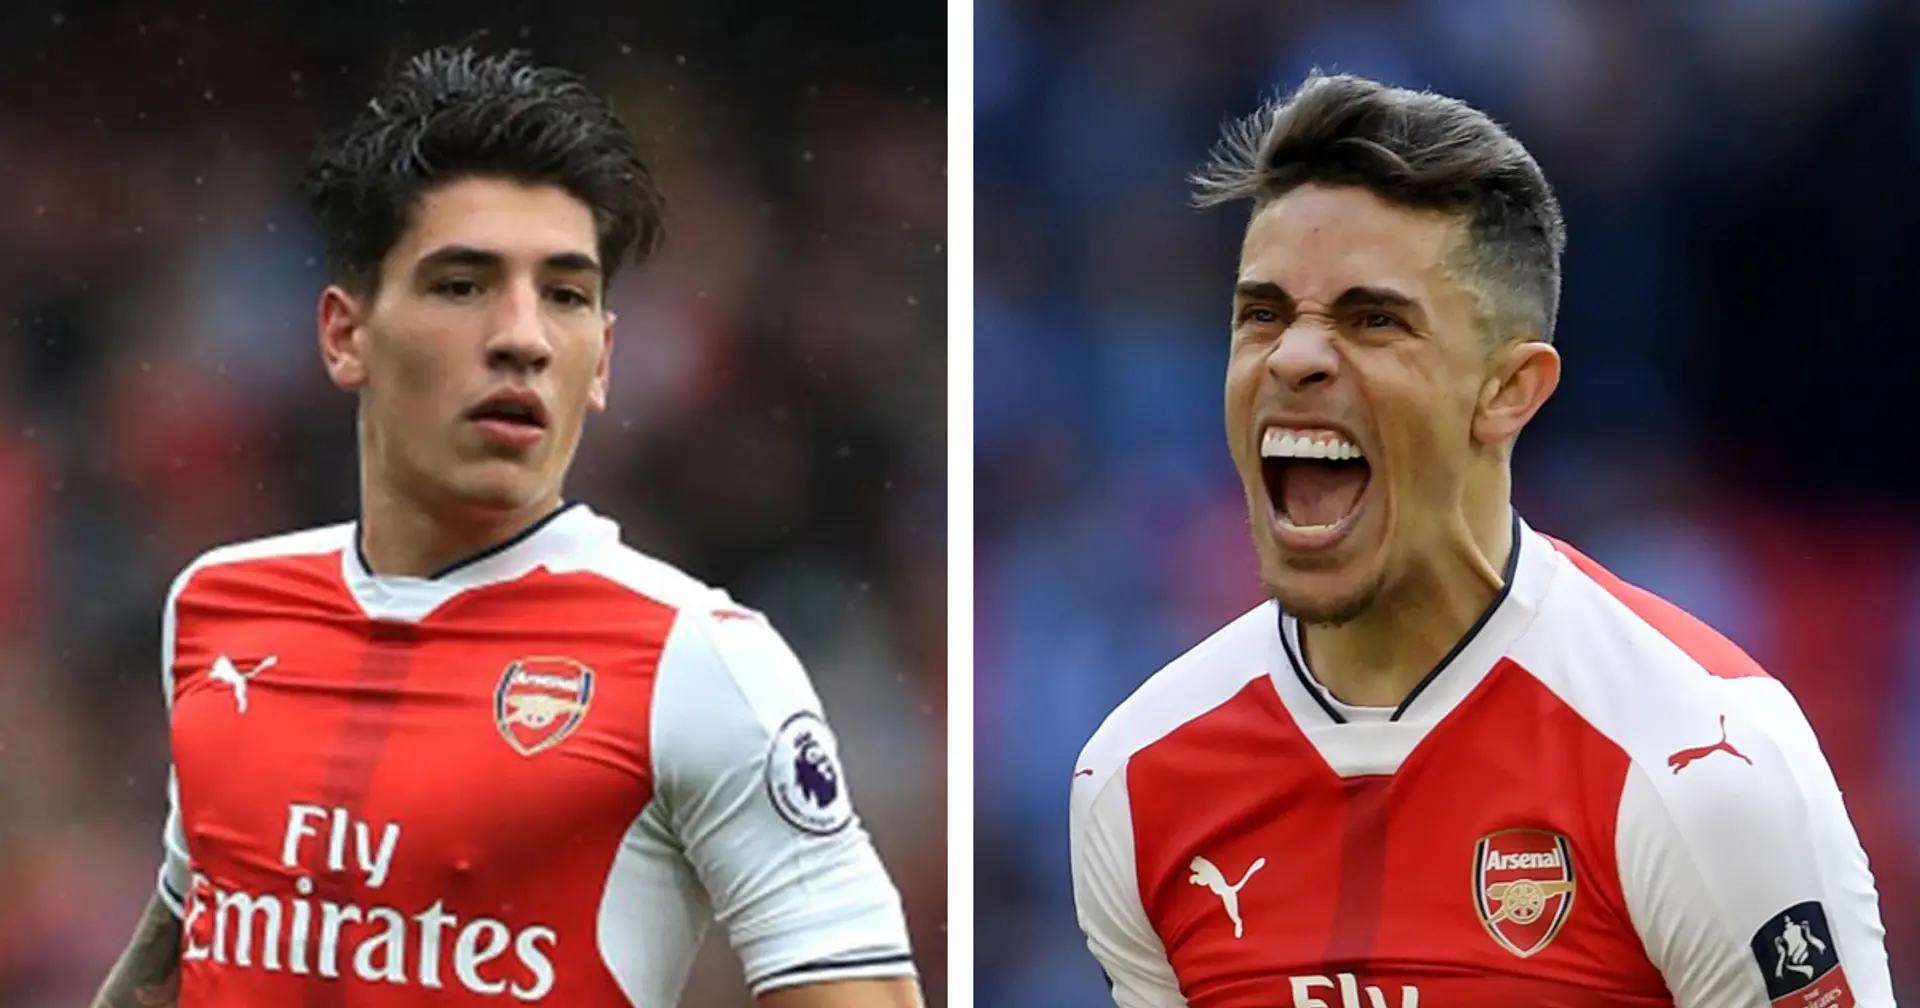 'Gabriel, Bellerin to anchor our backline': Gunners in 2015 predicted players who'd stay on now – how it fared